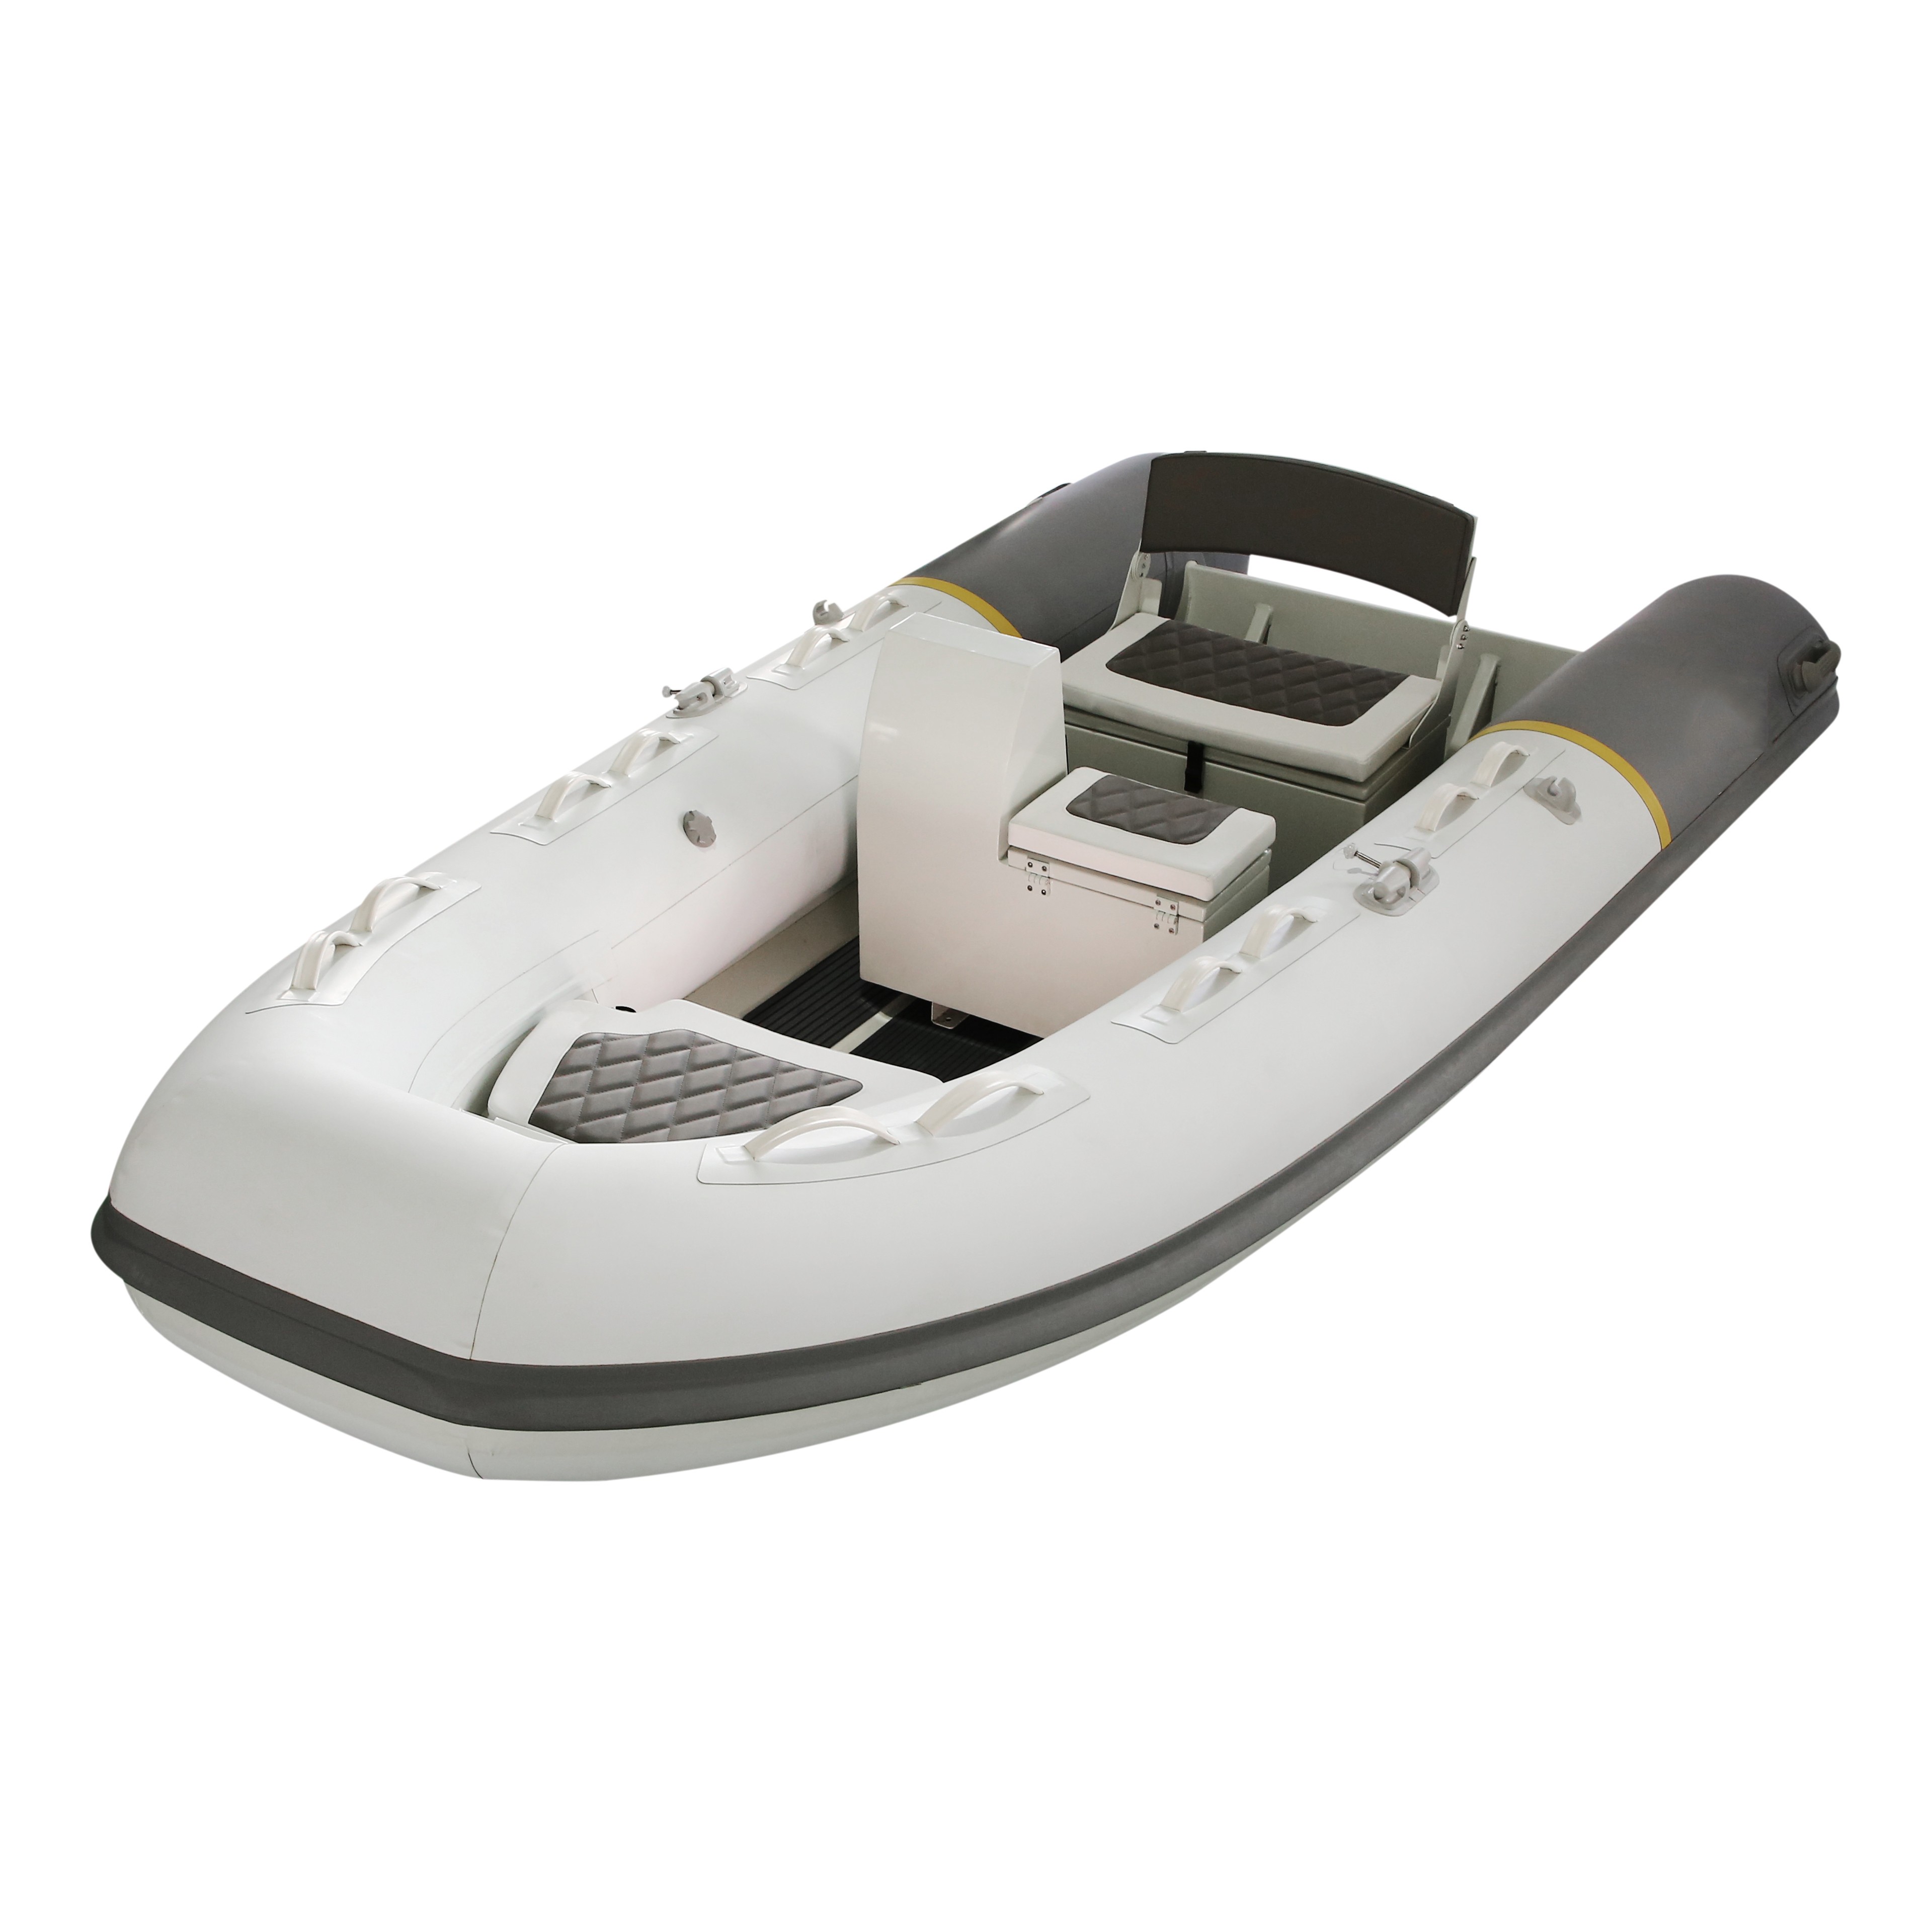 Rigid hull inflatable boat for sale and best inflatable boat